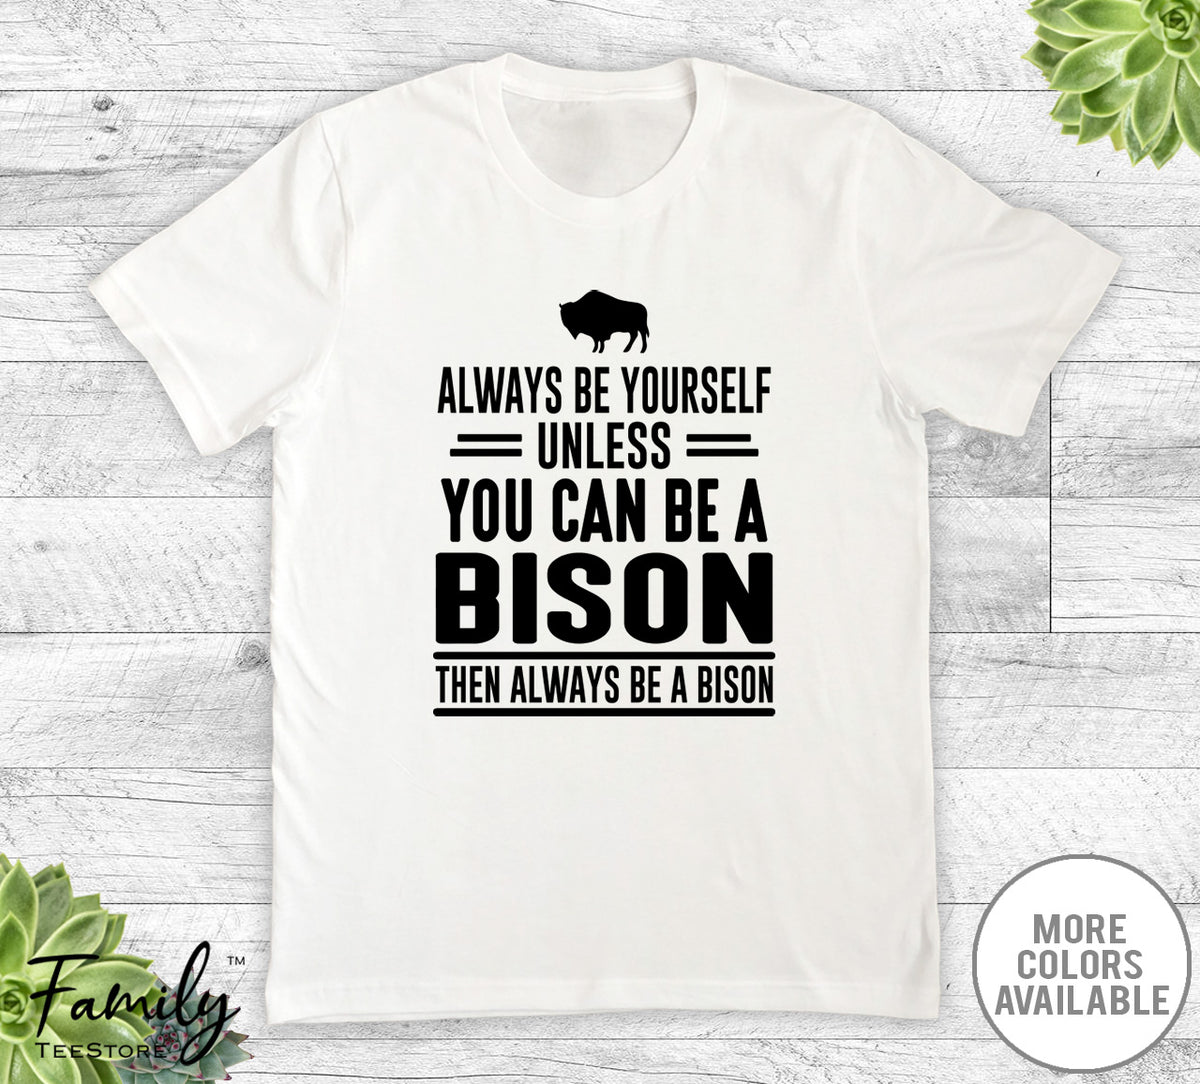 Always Be Yourself Unless You Can Be A Bison - Unisex T-shirt - Bison Shirt - Bison Gift - familyteeprints